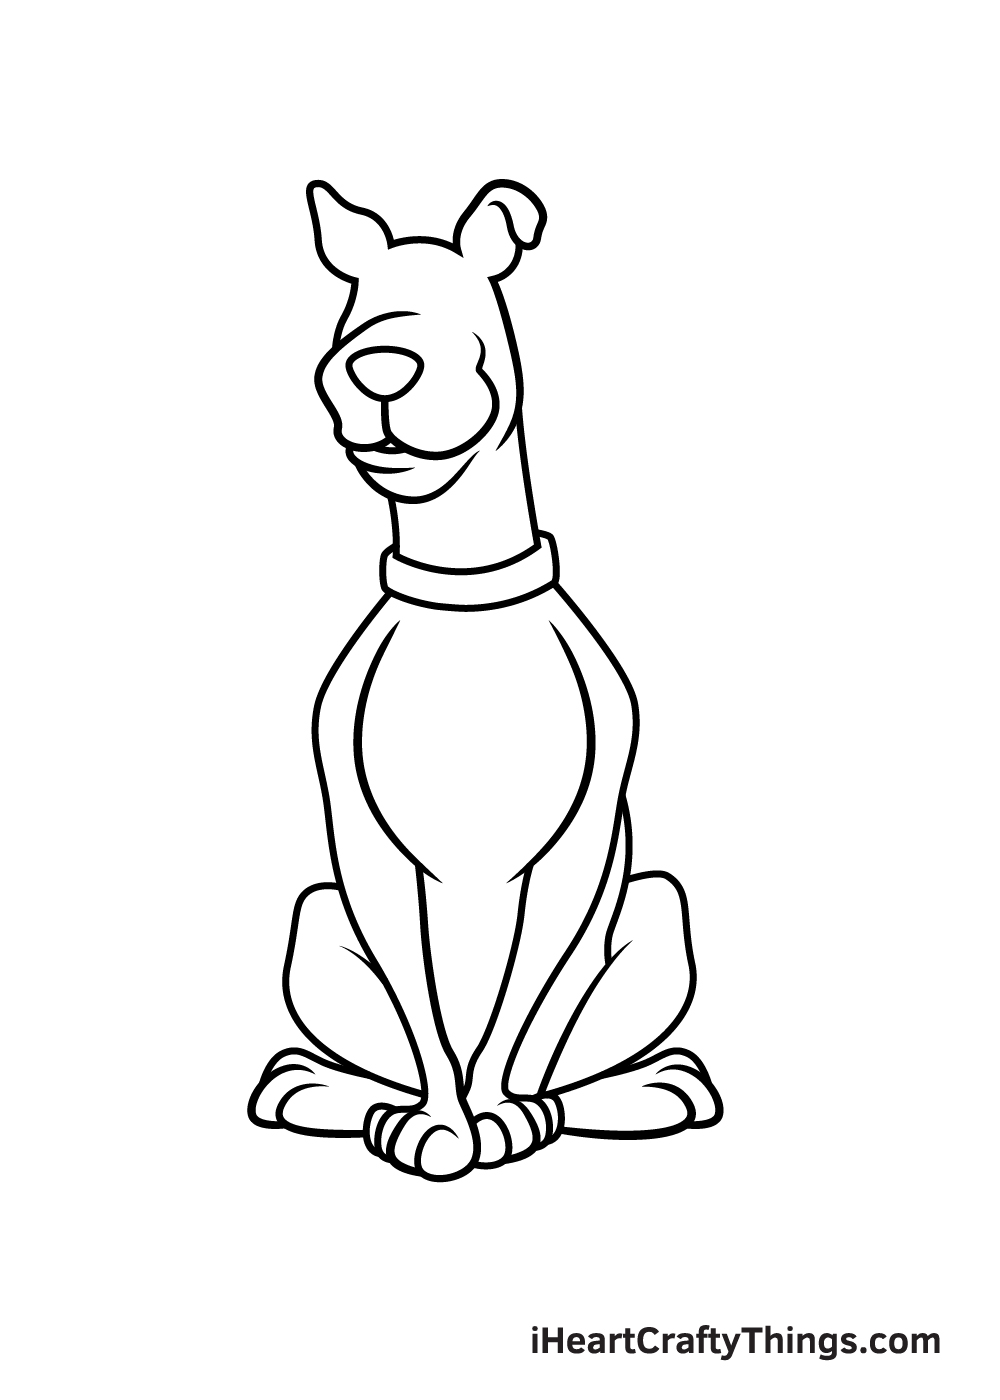 drawing Scooby-Doo step 7